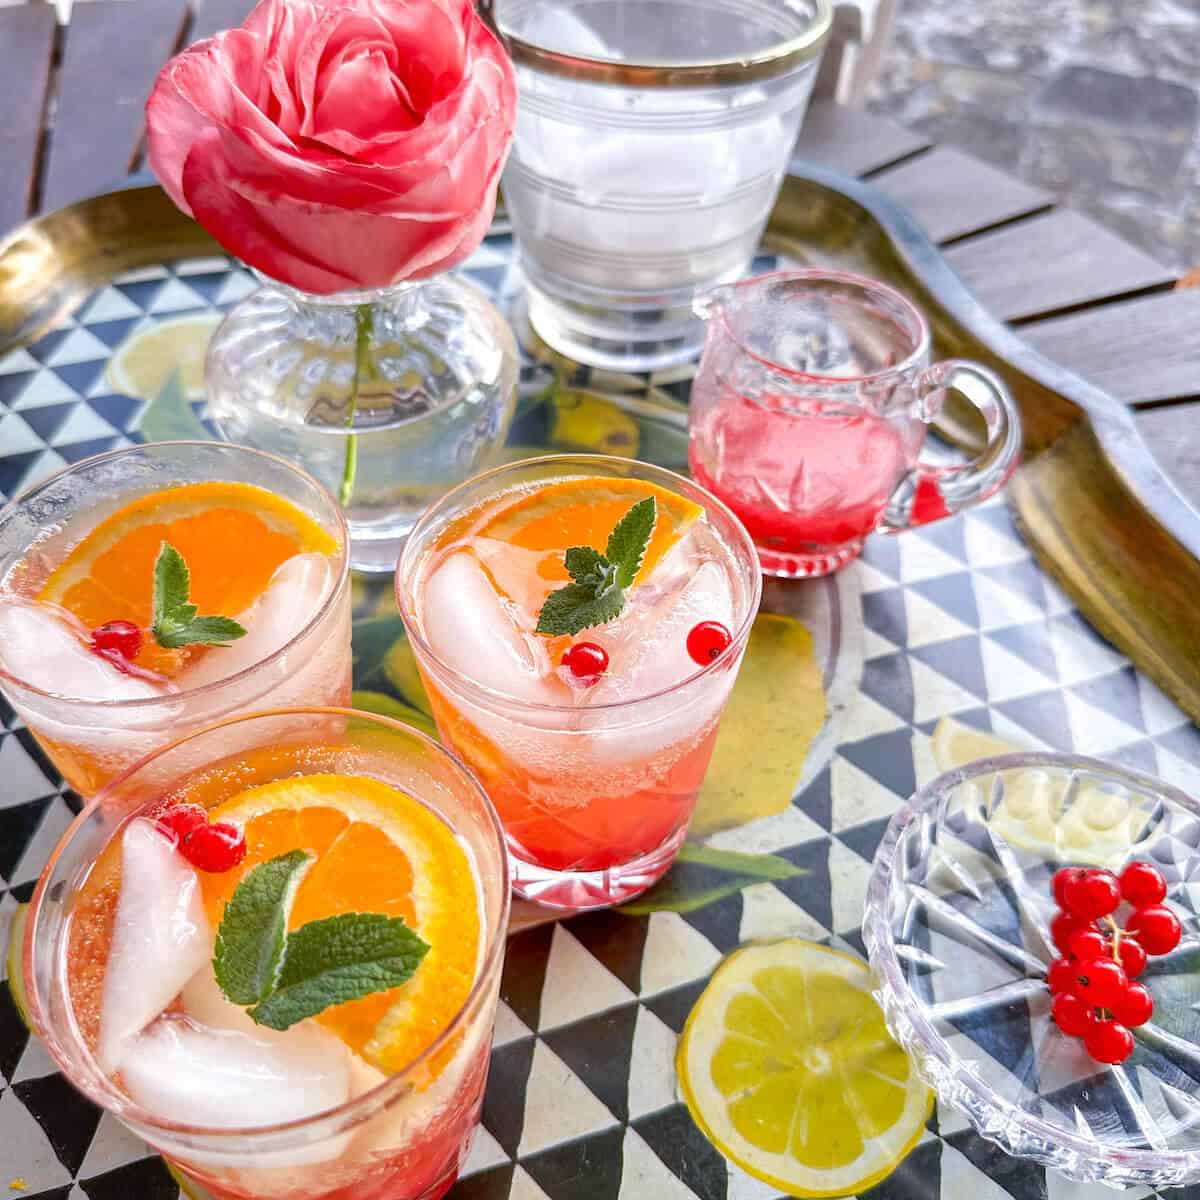 A serving tray with 3 glasses of red currant cordial drinks next to a small jug of cordial, an ice bucket and a vase with a rose in it. 